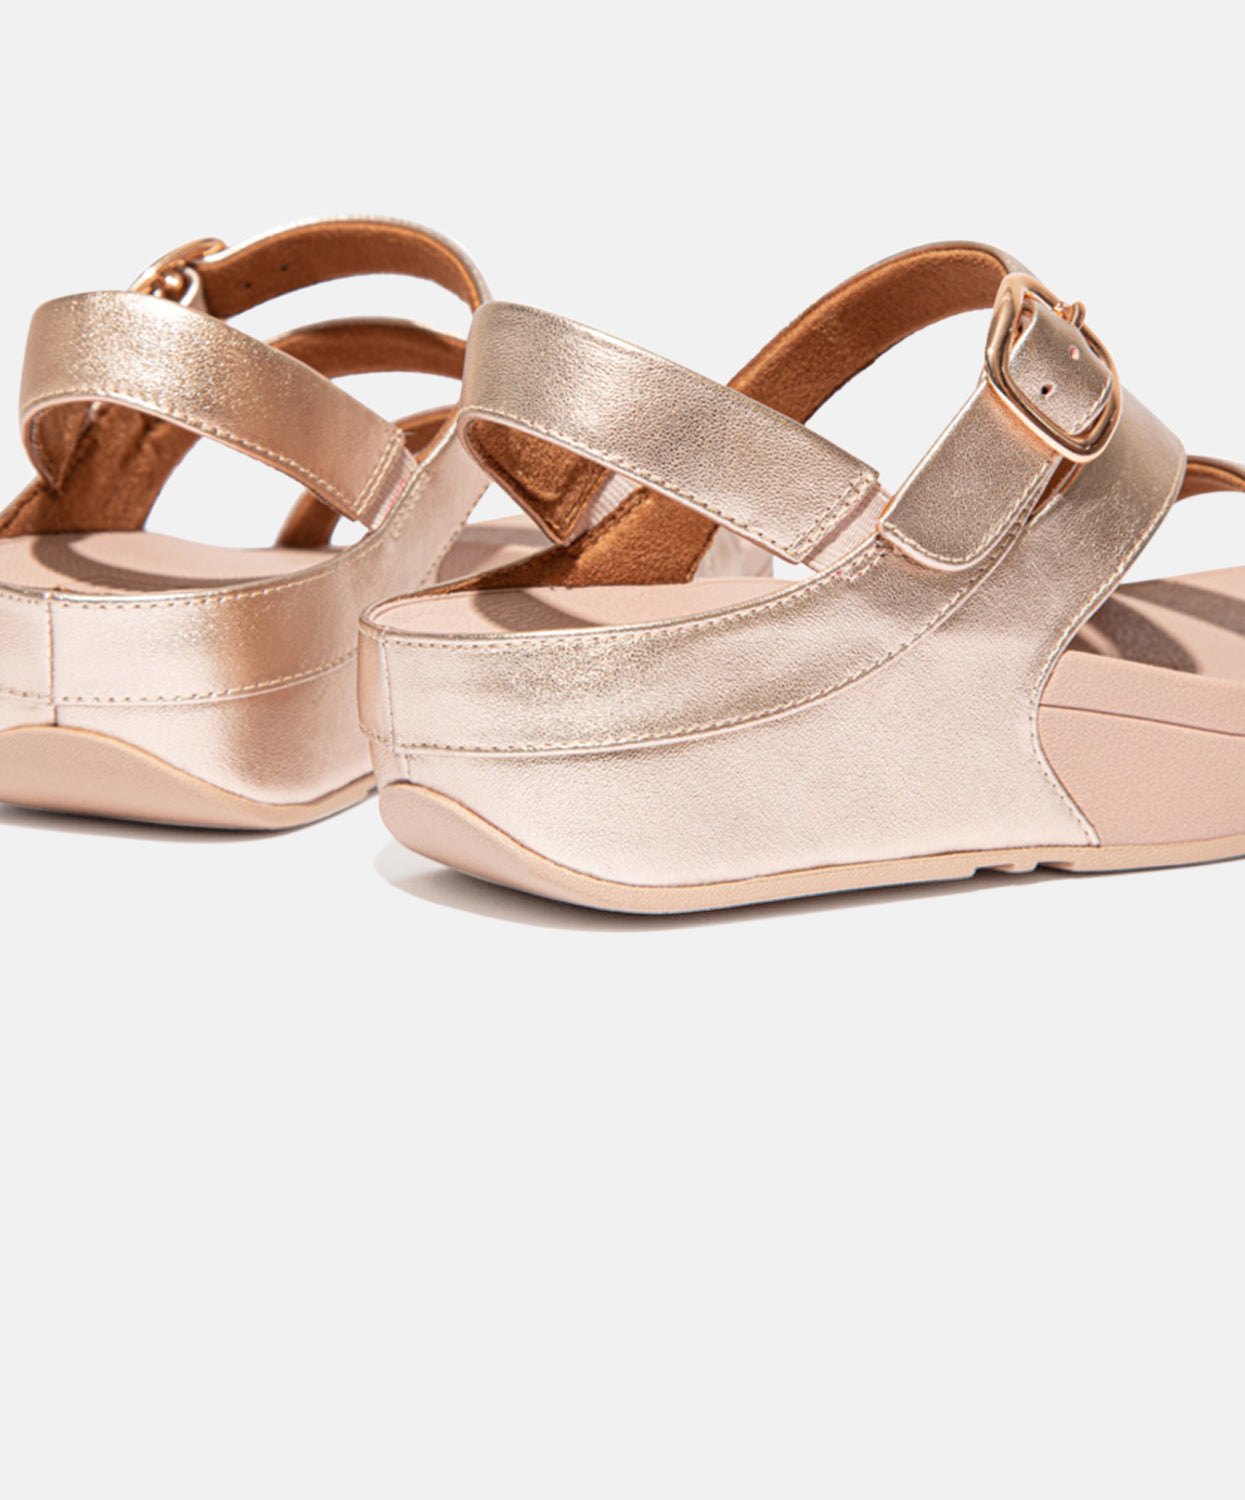 Podiatrist-Approved FitFlop Sandals On Sale Now At Nordstrom